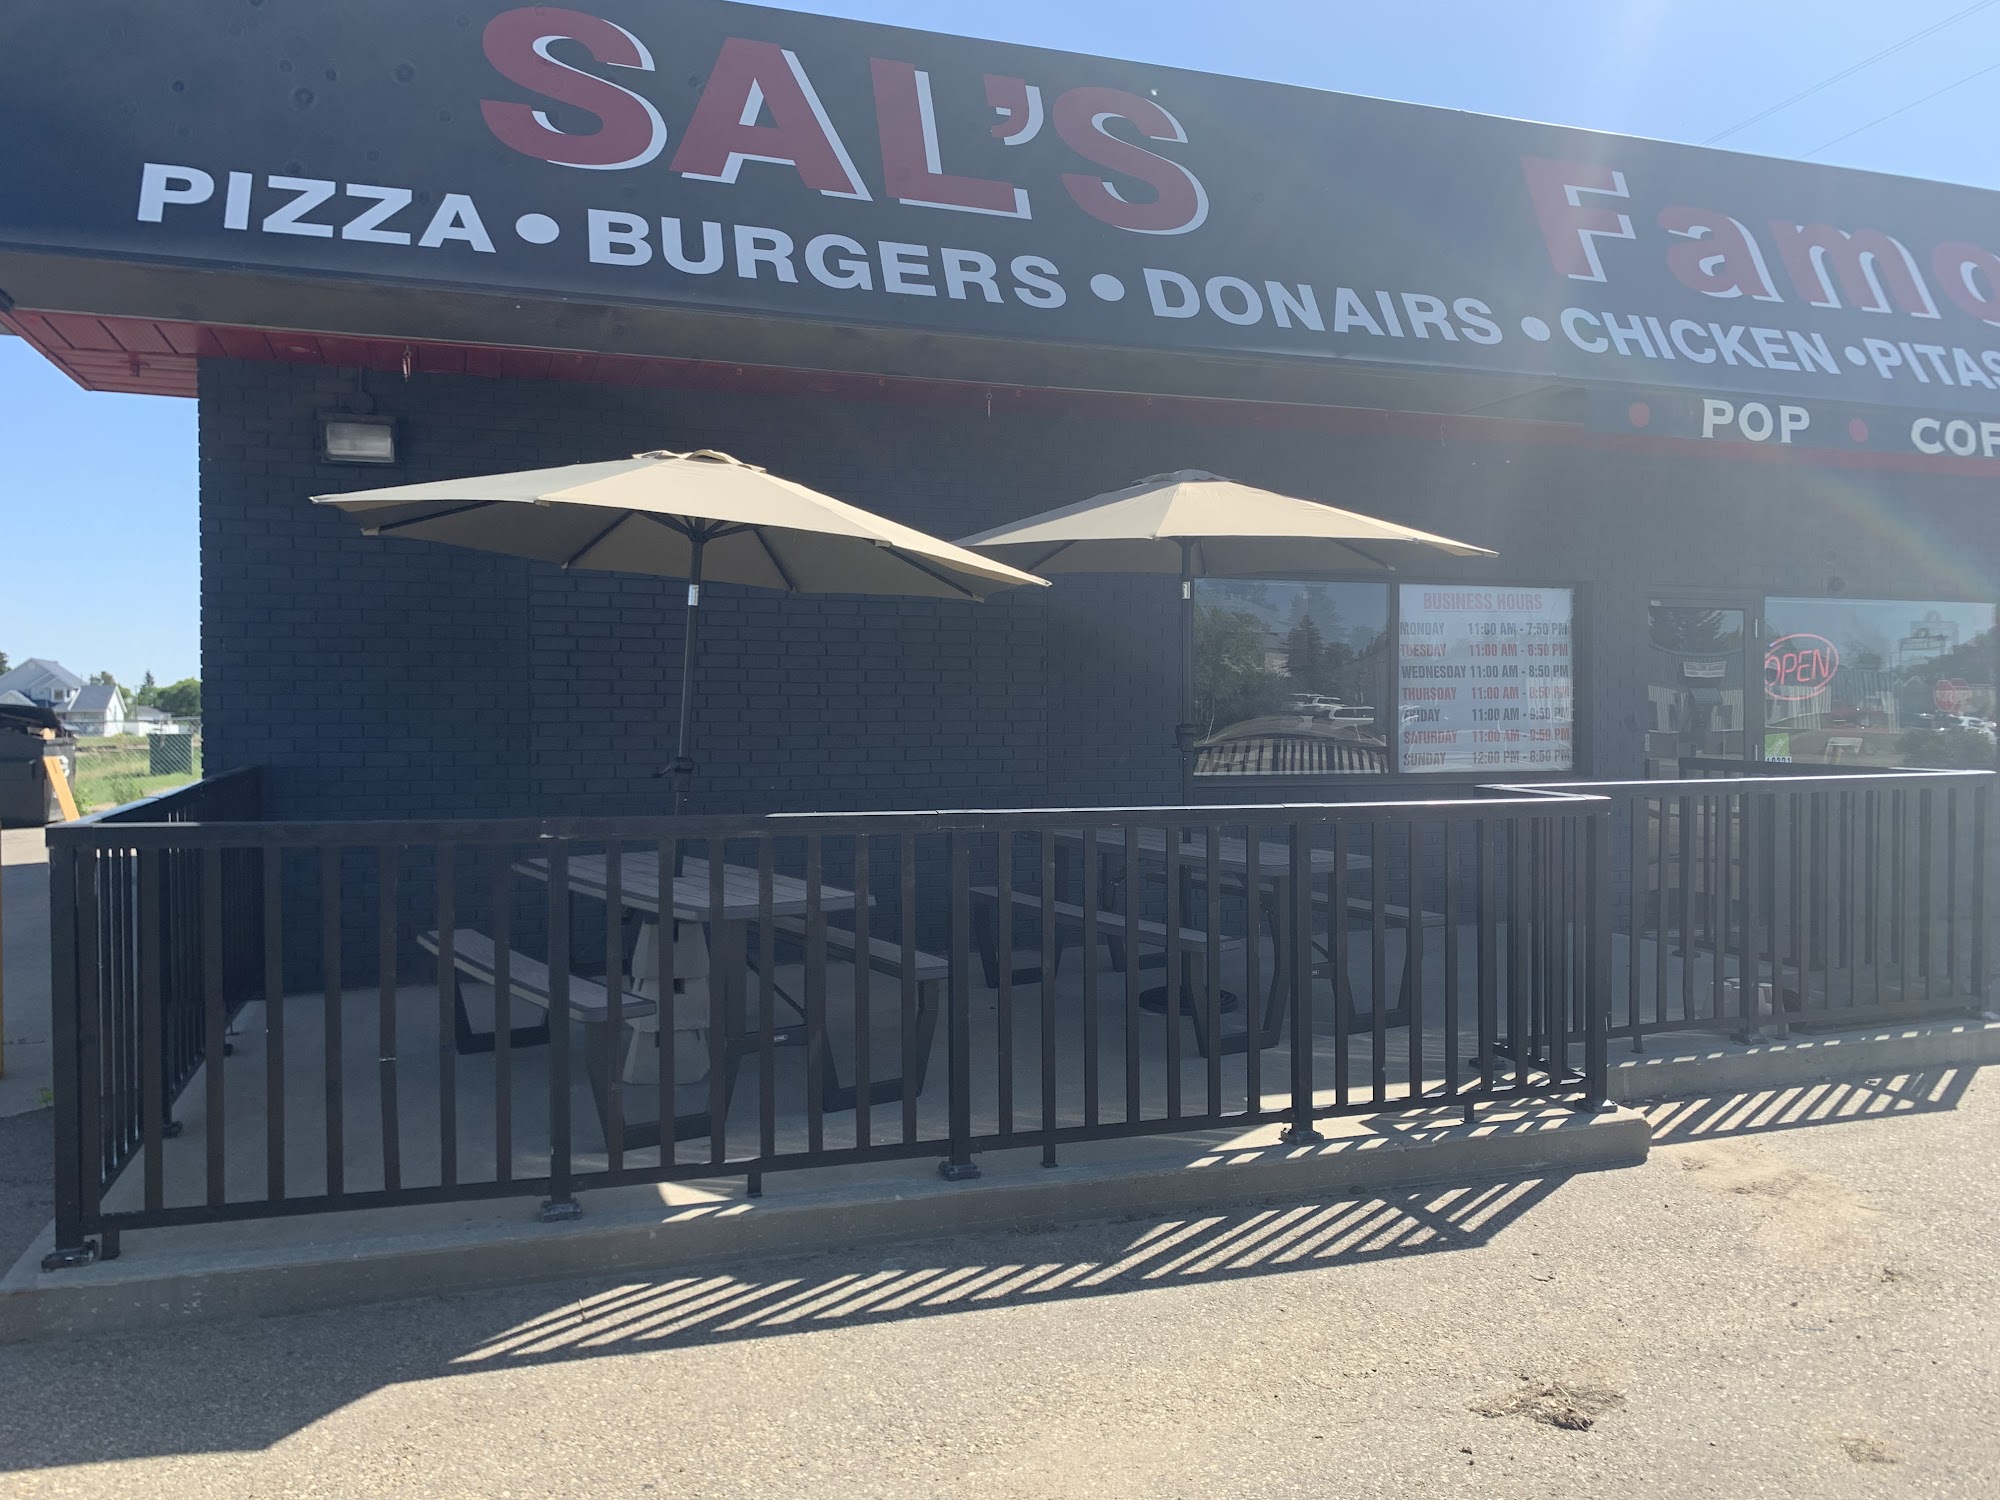 Sal's Famous Morinville